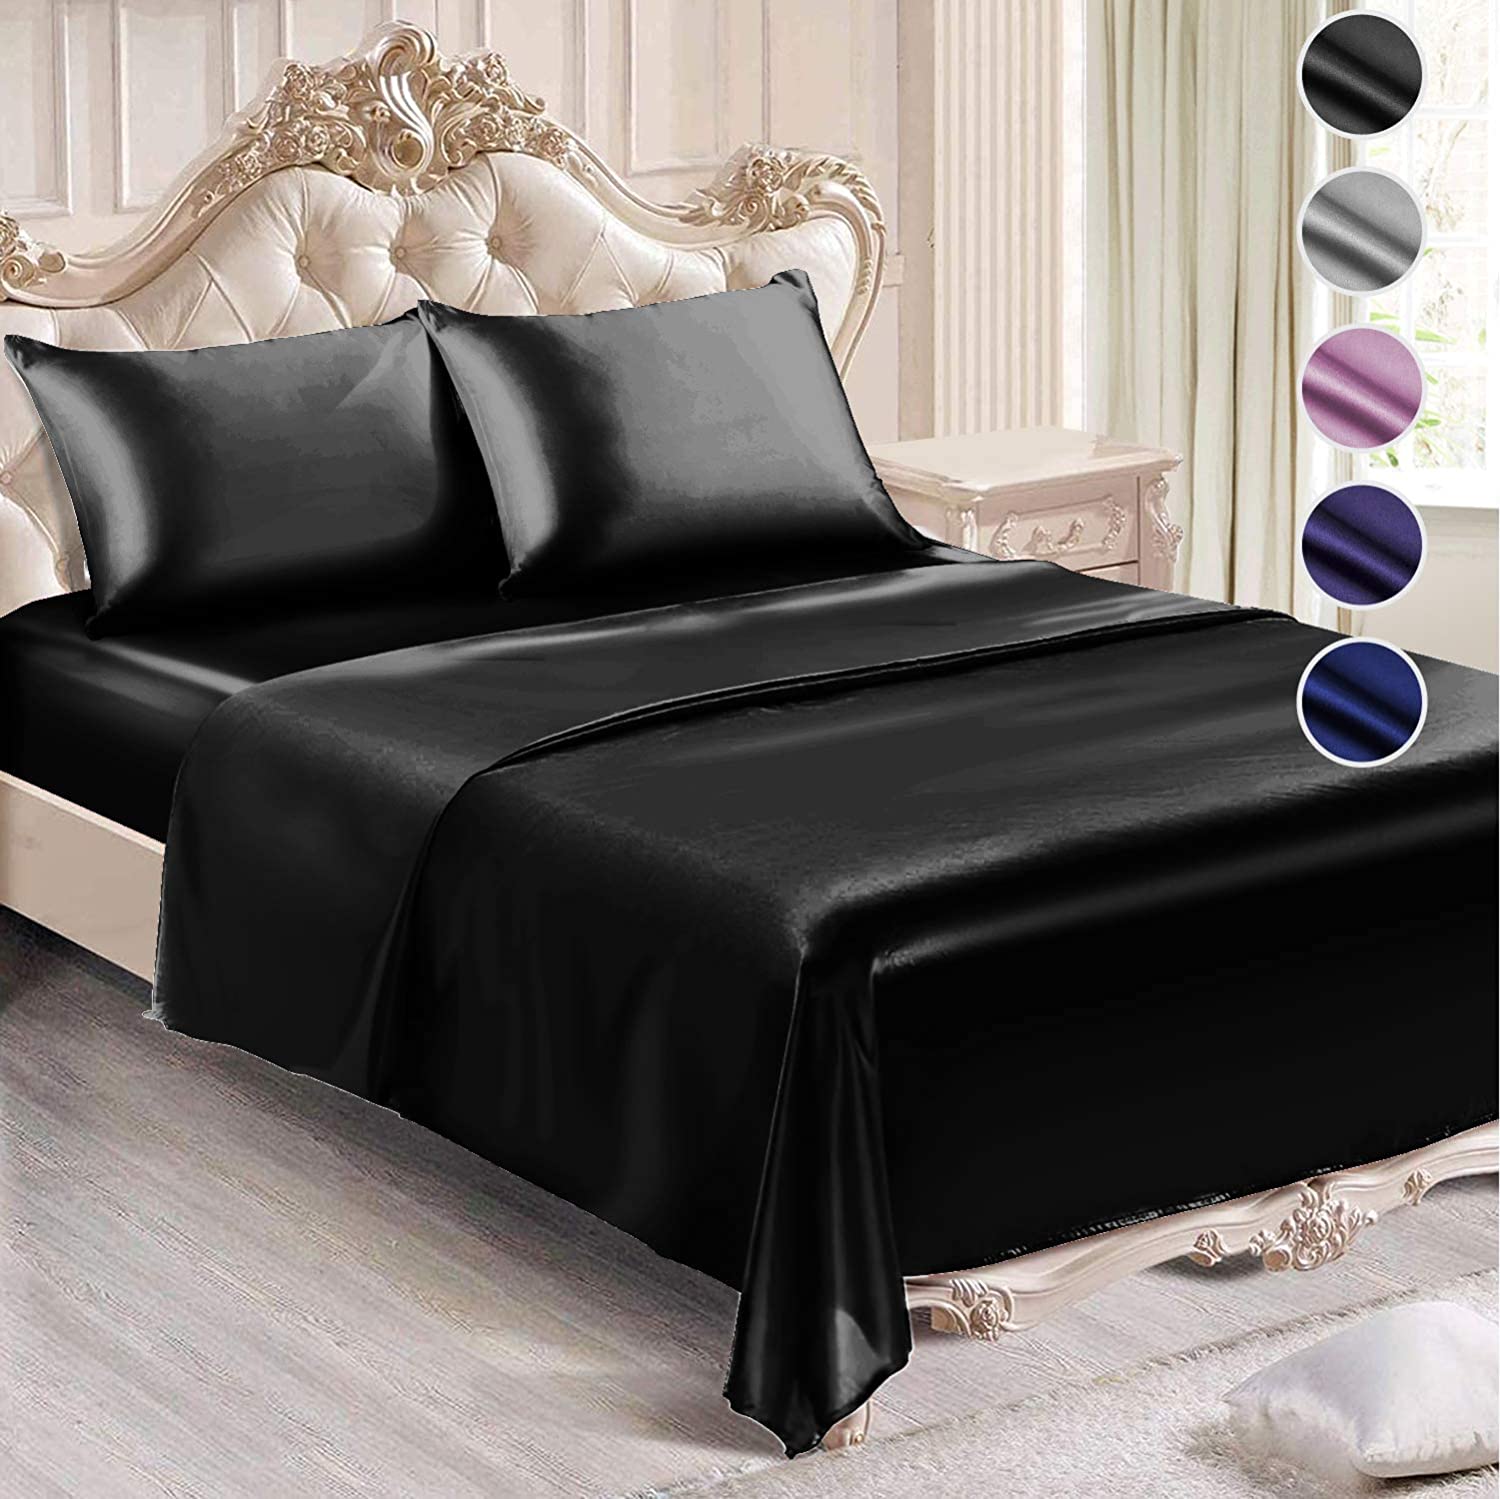 Super Soft King Size Satin Sheet Set 4-pcs Flat Fitted Bed Cover 2 Pillowcases 